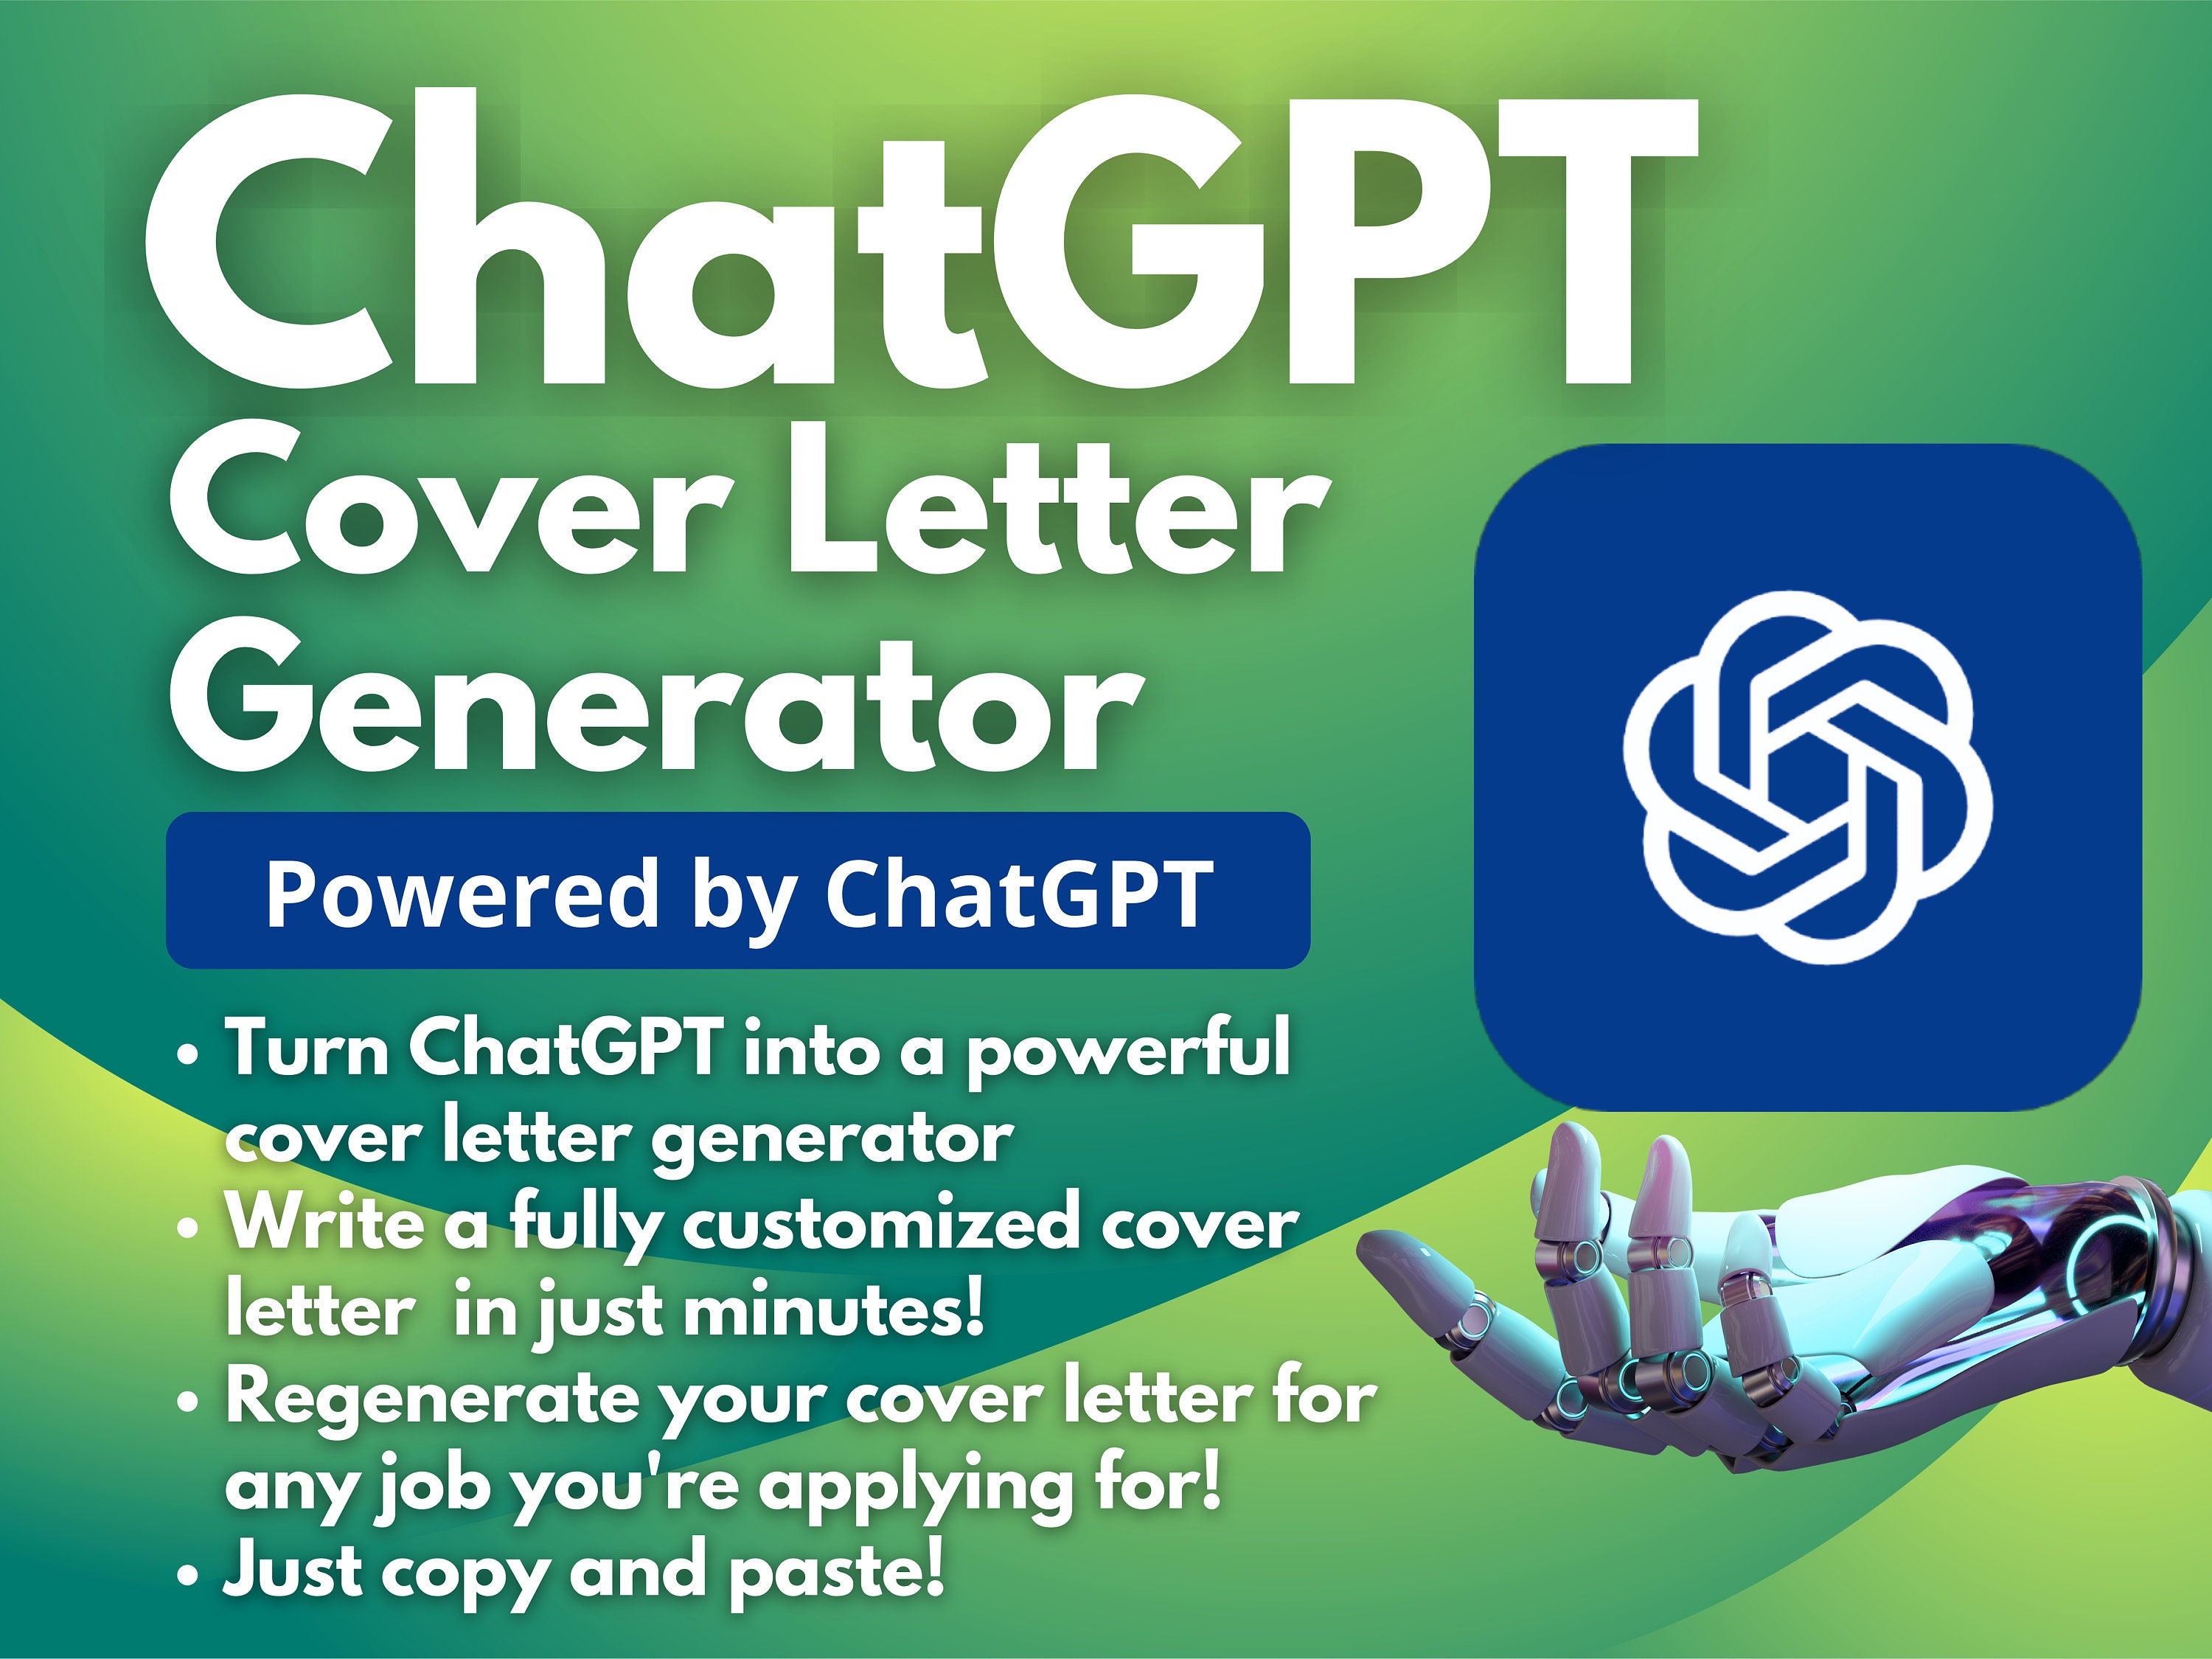 AI Cover Letter Generator: GPT-4 Powered Writer